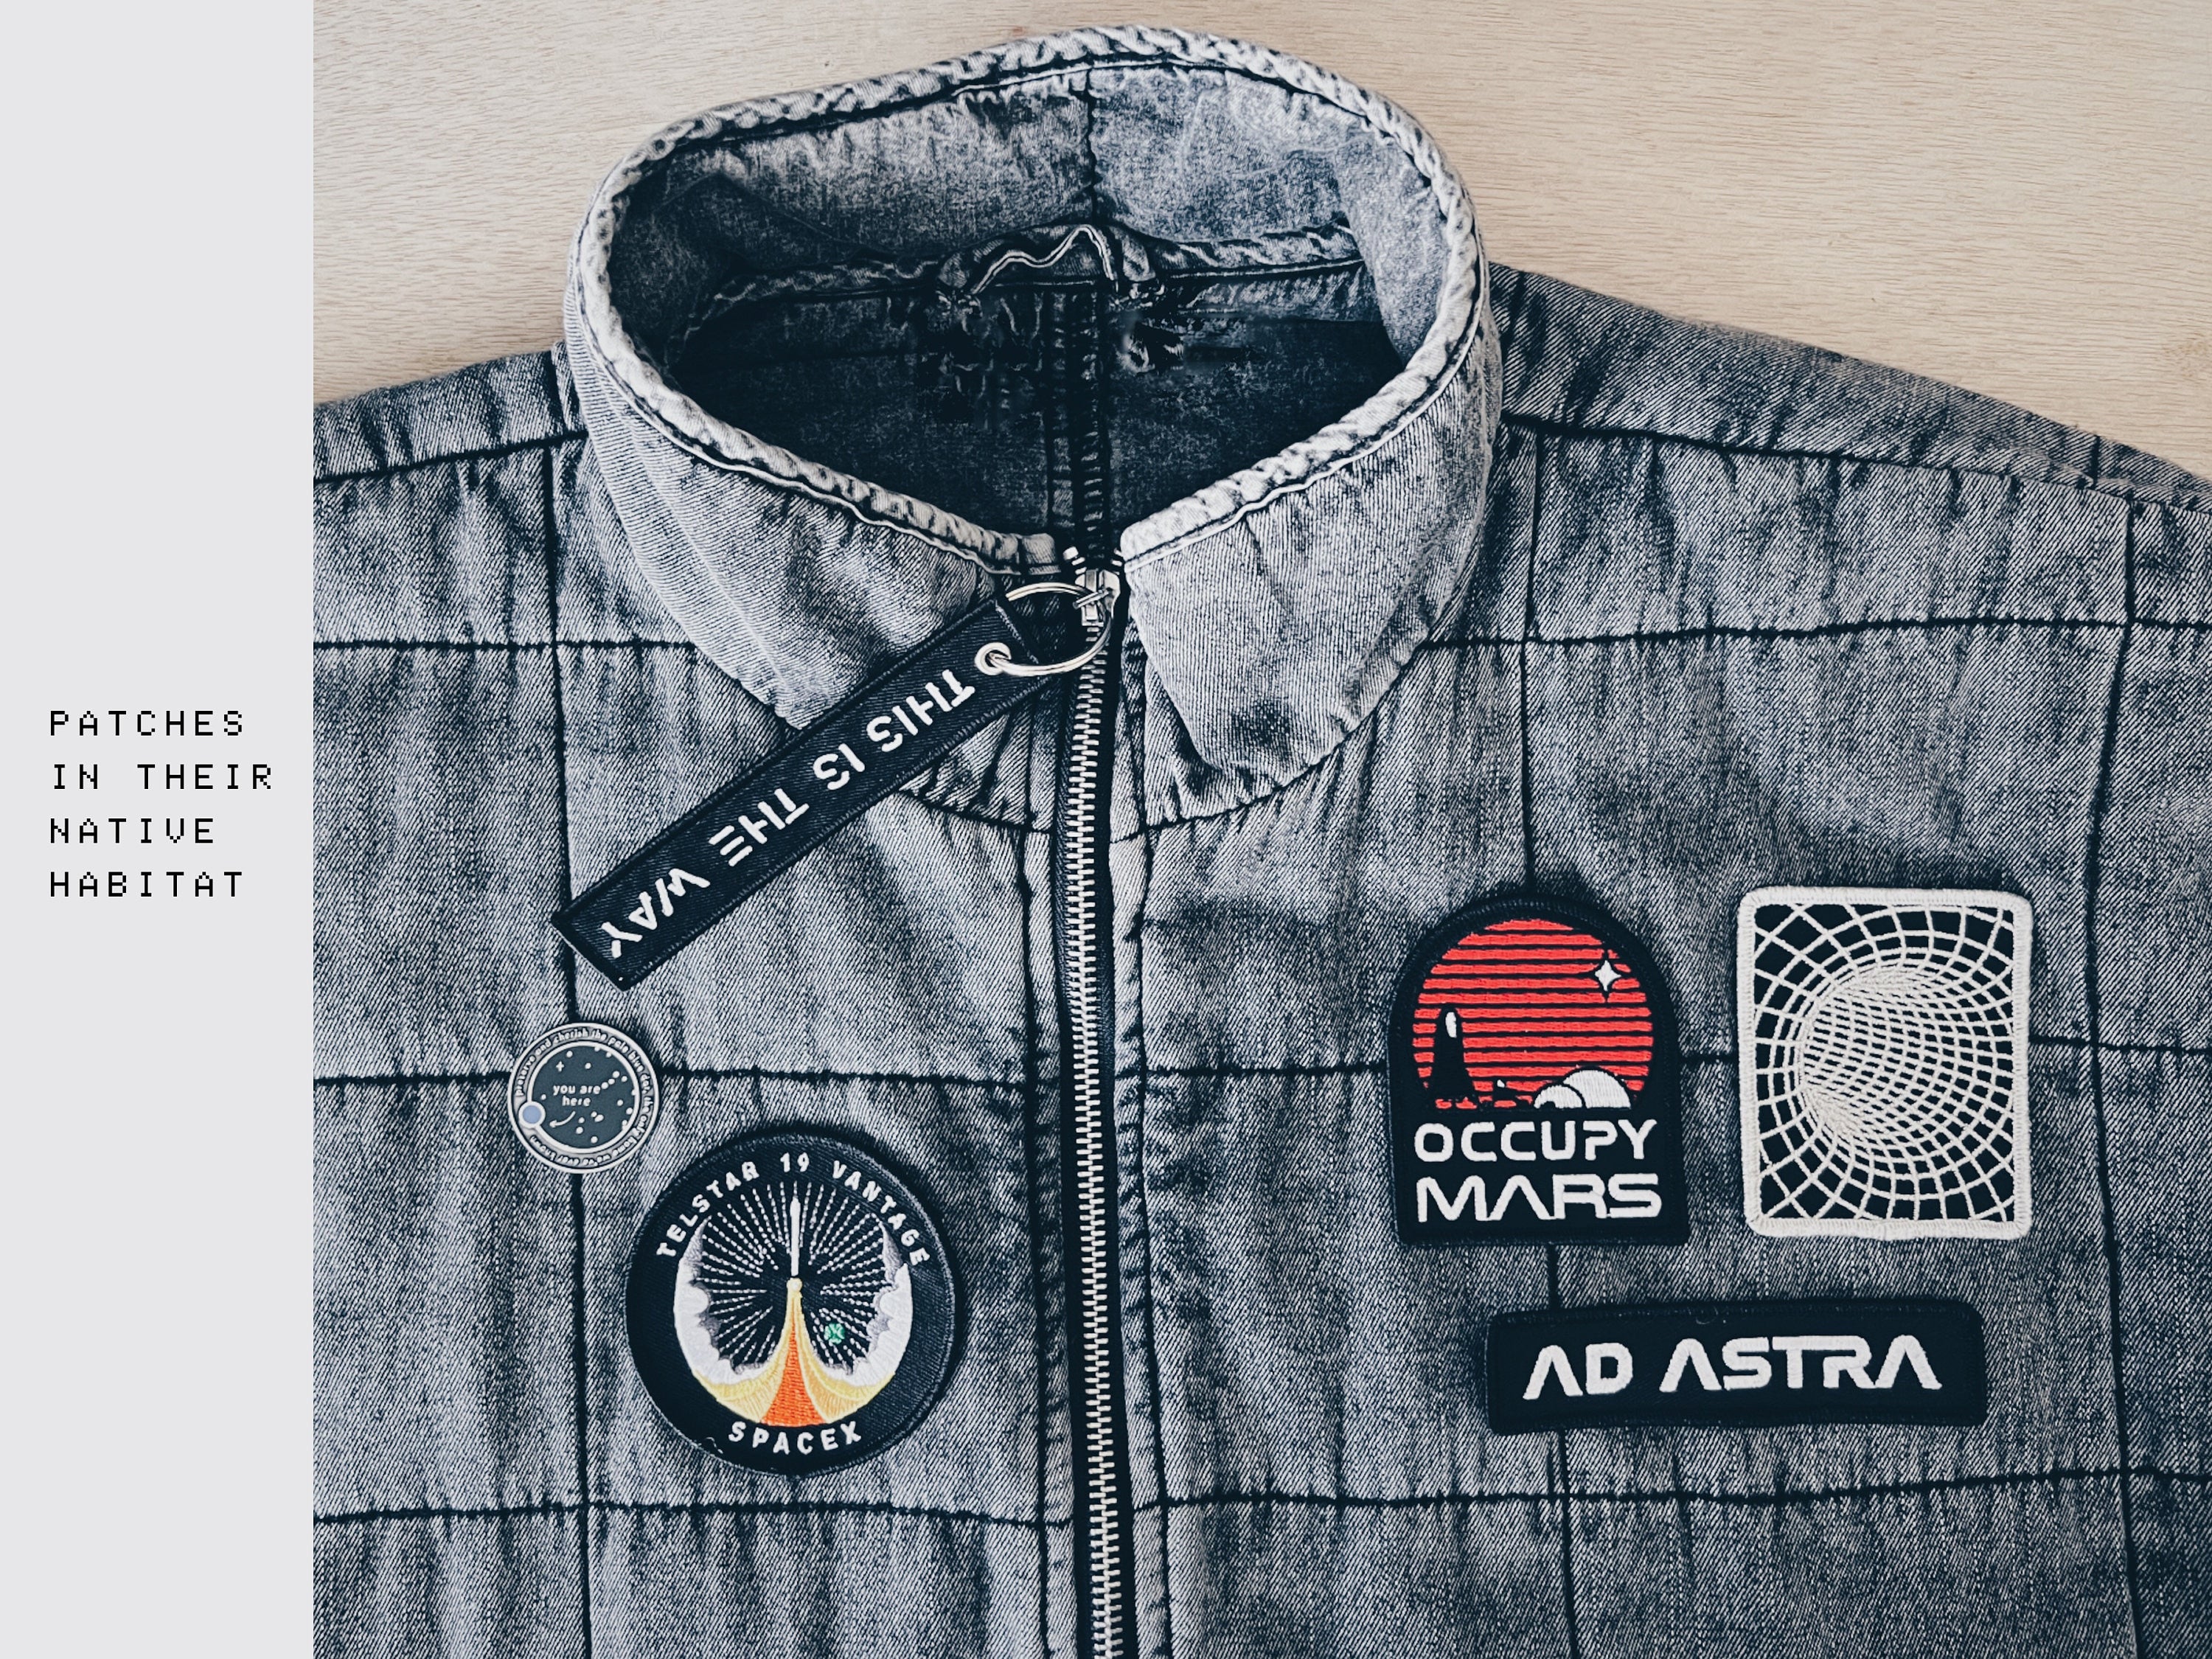 Voyager Solar System Patch - EDC Jacket Mission Patches - Golden Record Space Patch